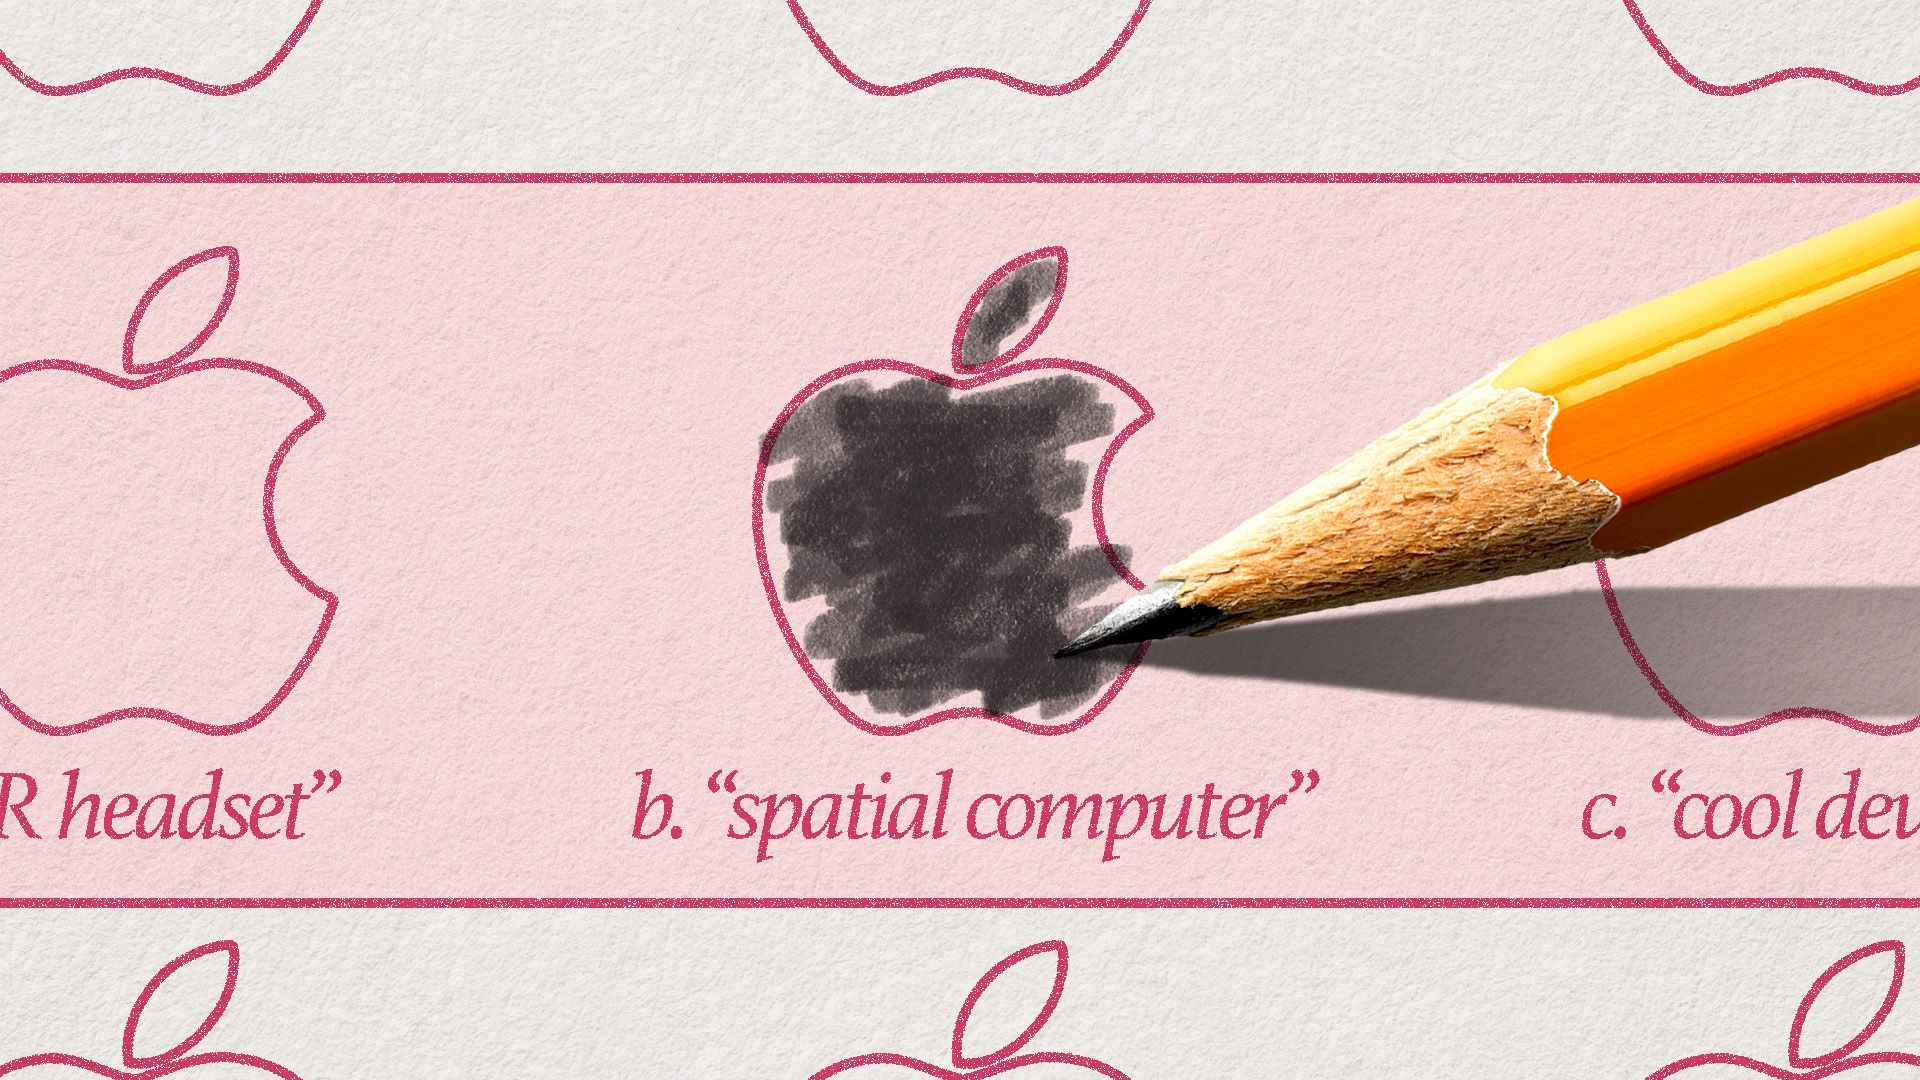 Illustration of a standardized test with apple logos for circles with the middle one that reads: b. "spatial computer" being filled in by a pencil